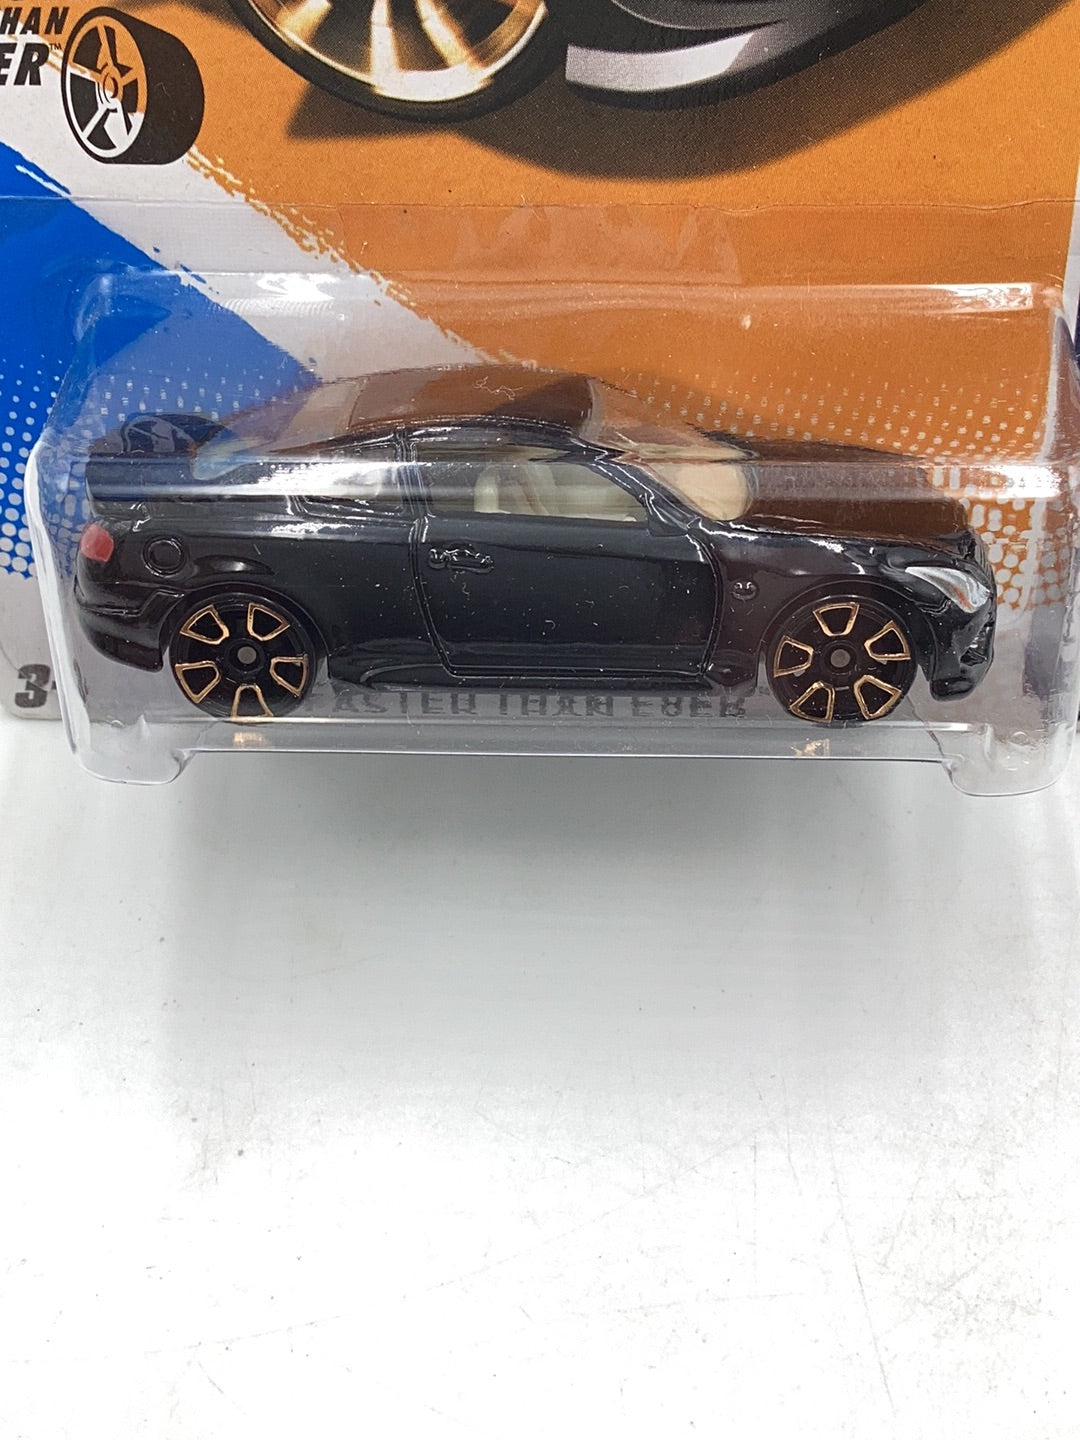 2012 Hot Wheels #94 Infiniti G37 Faster than ever FTE2s Black small crease with protector